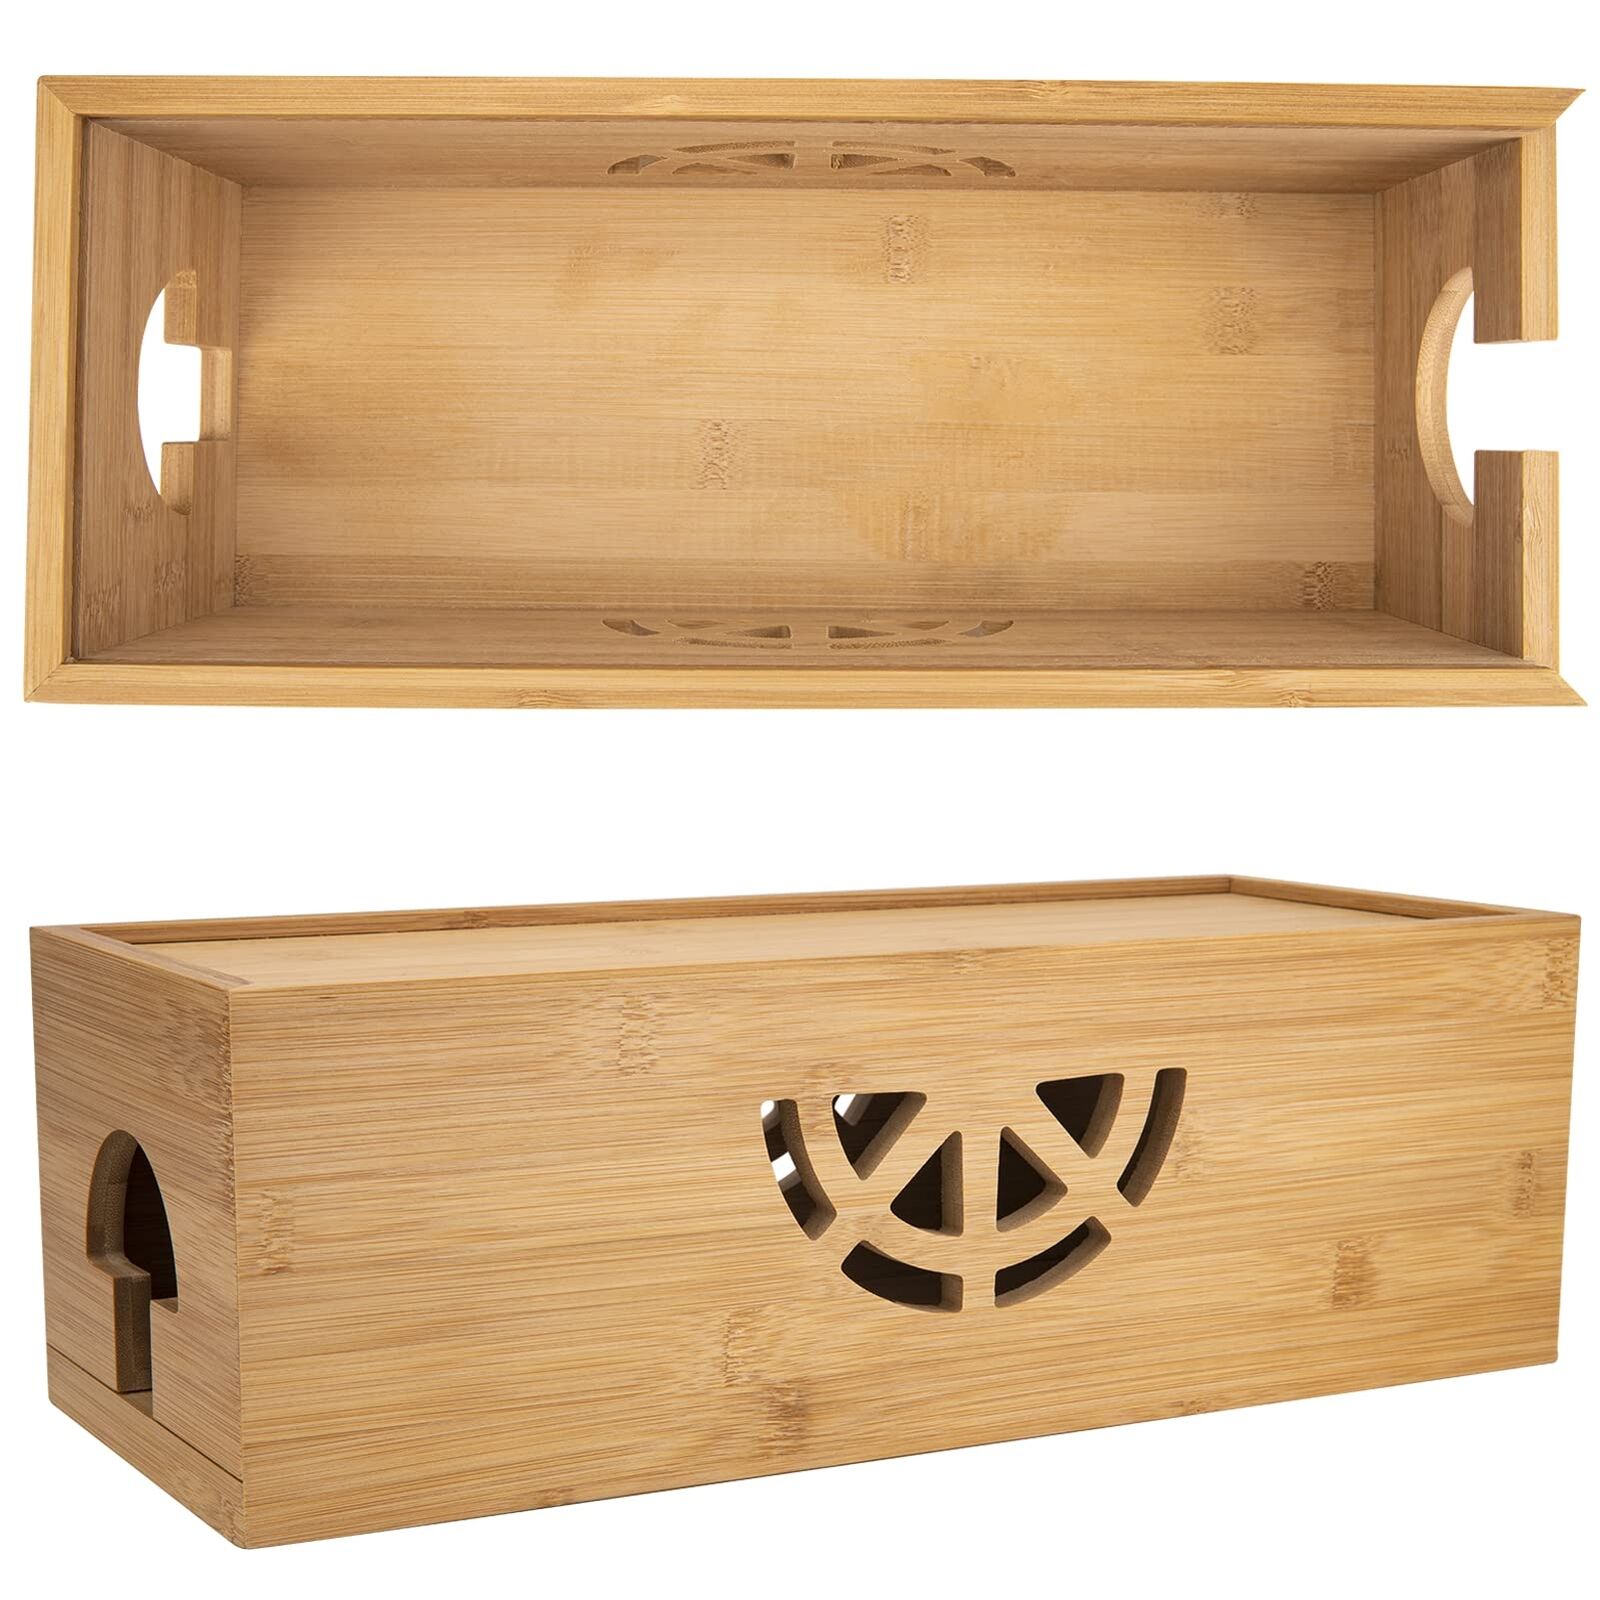 Cable Management Box,Bamboo Cable Management Box,Cord Management Box for Desk...